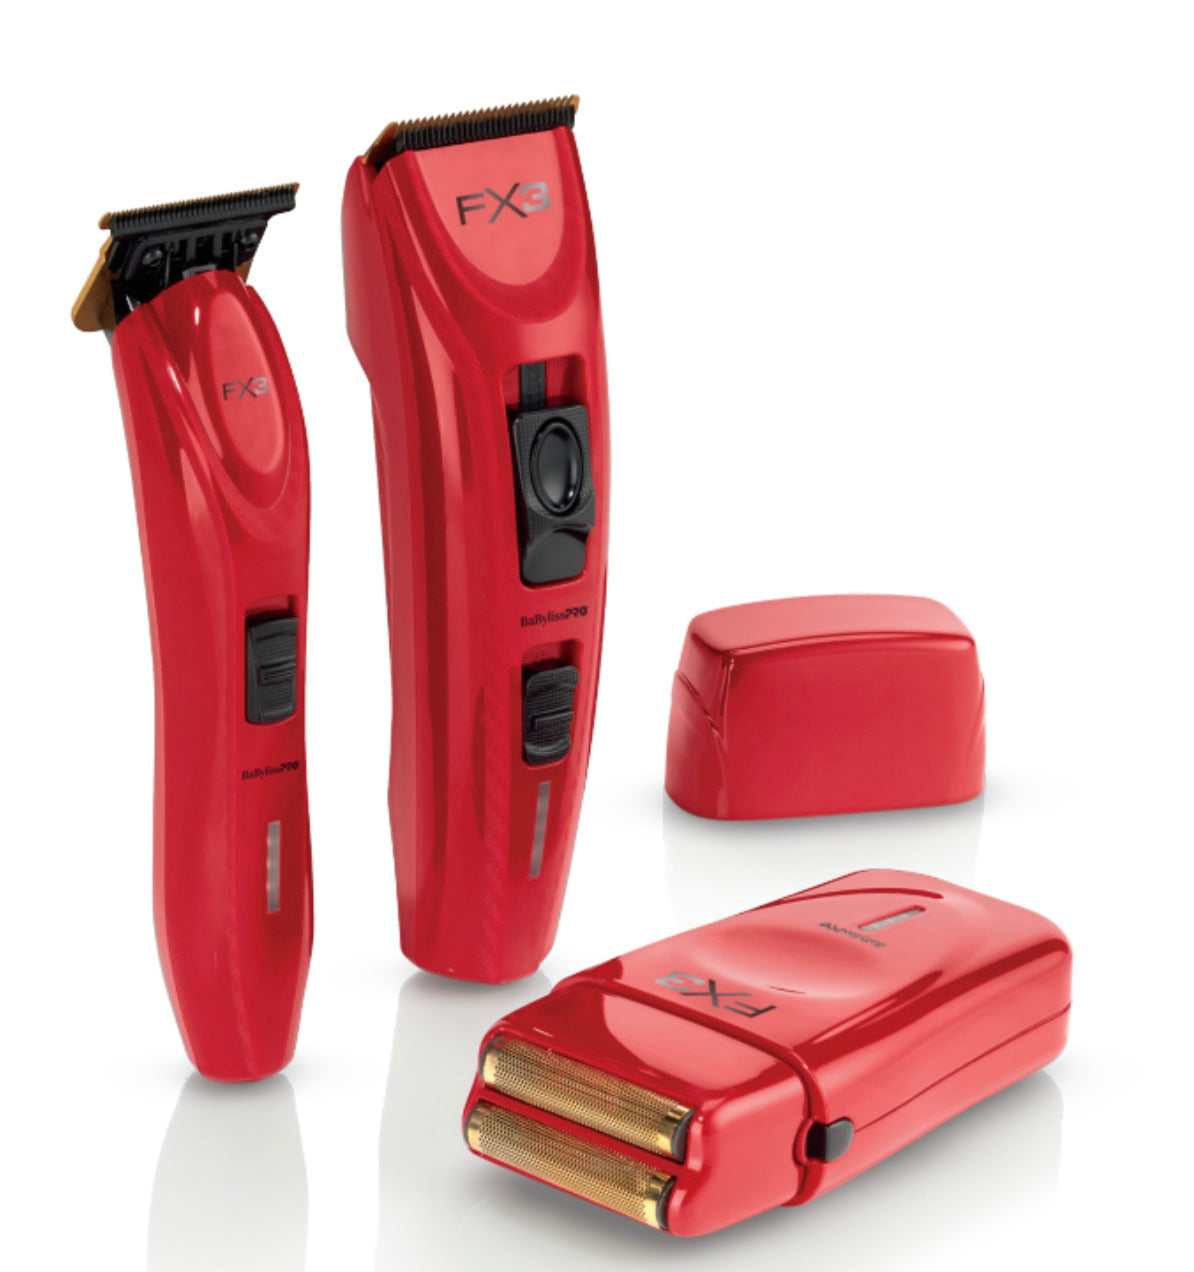 BaByliss Pro REDFX Lithium Red/Gold Barber Hair Clipper/BabylissPro Trimmer